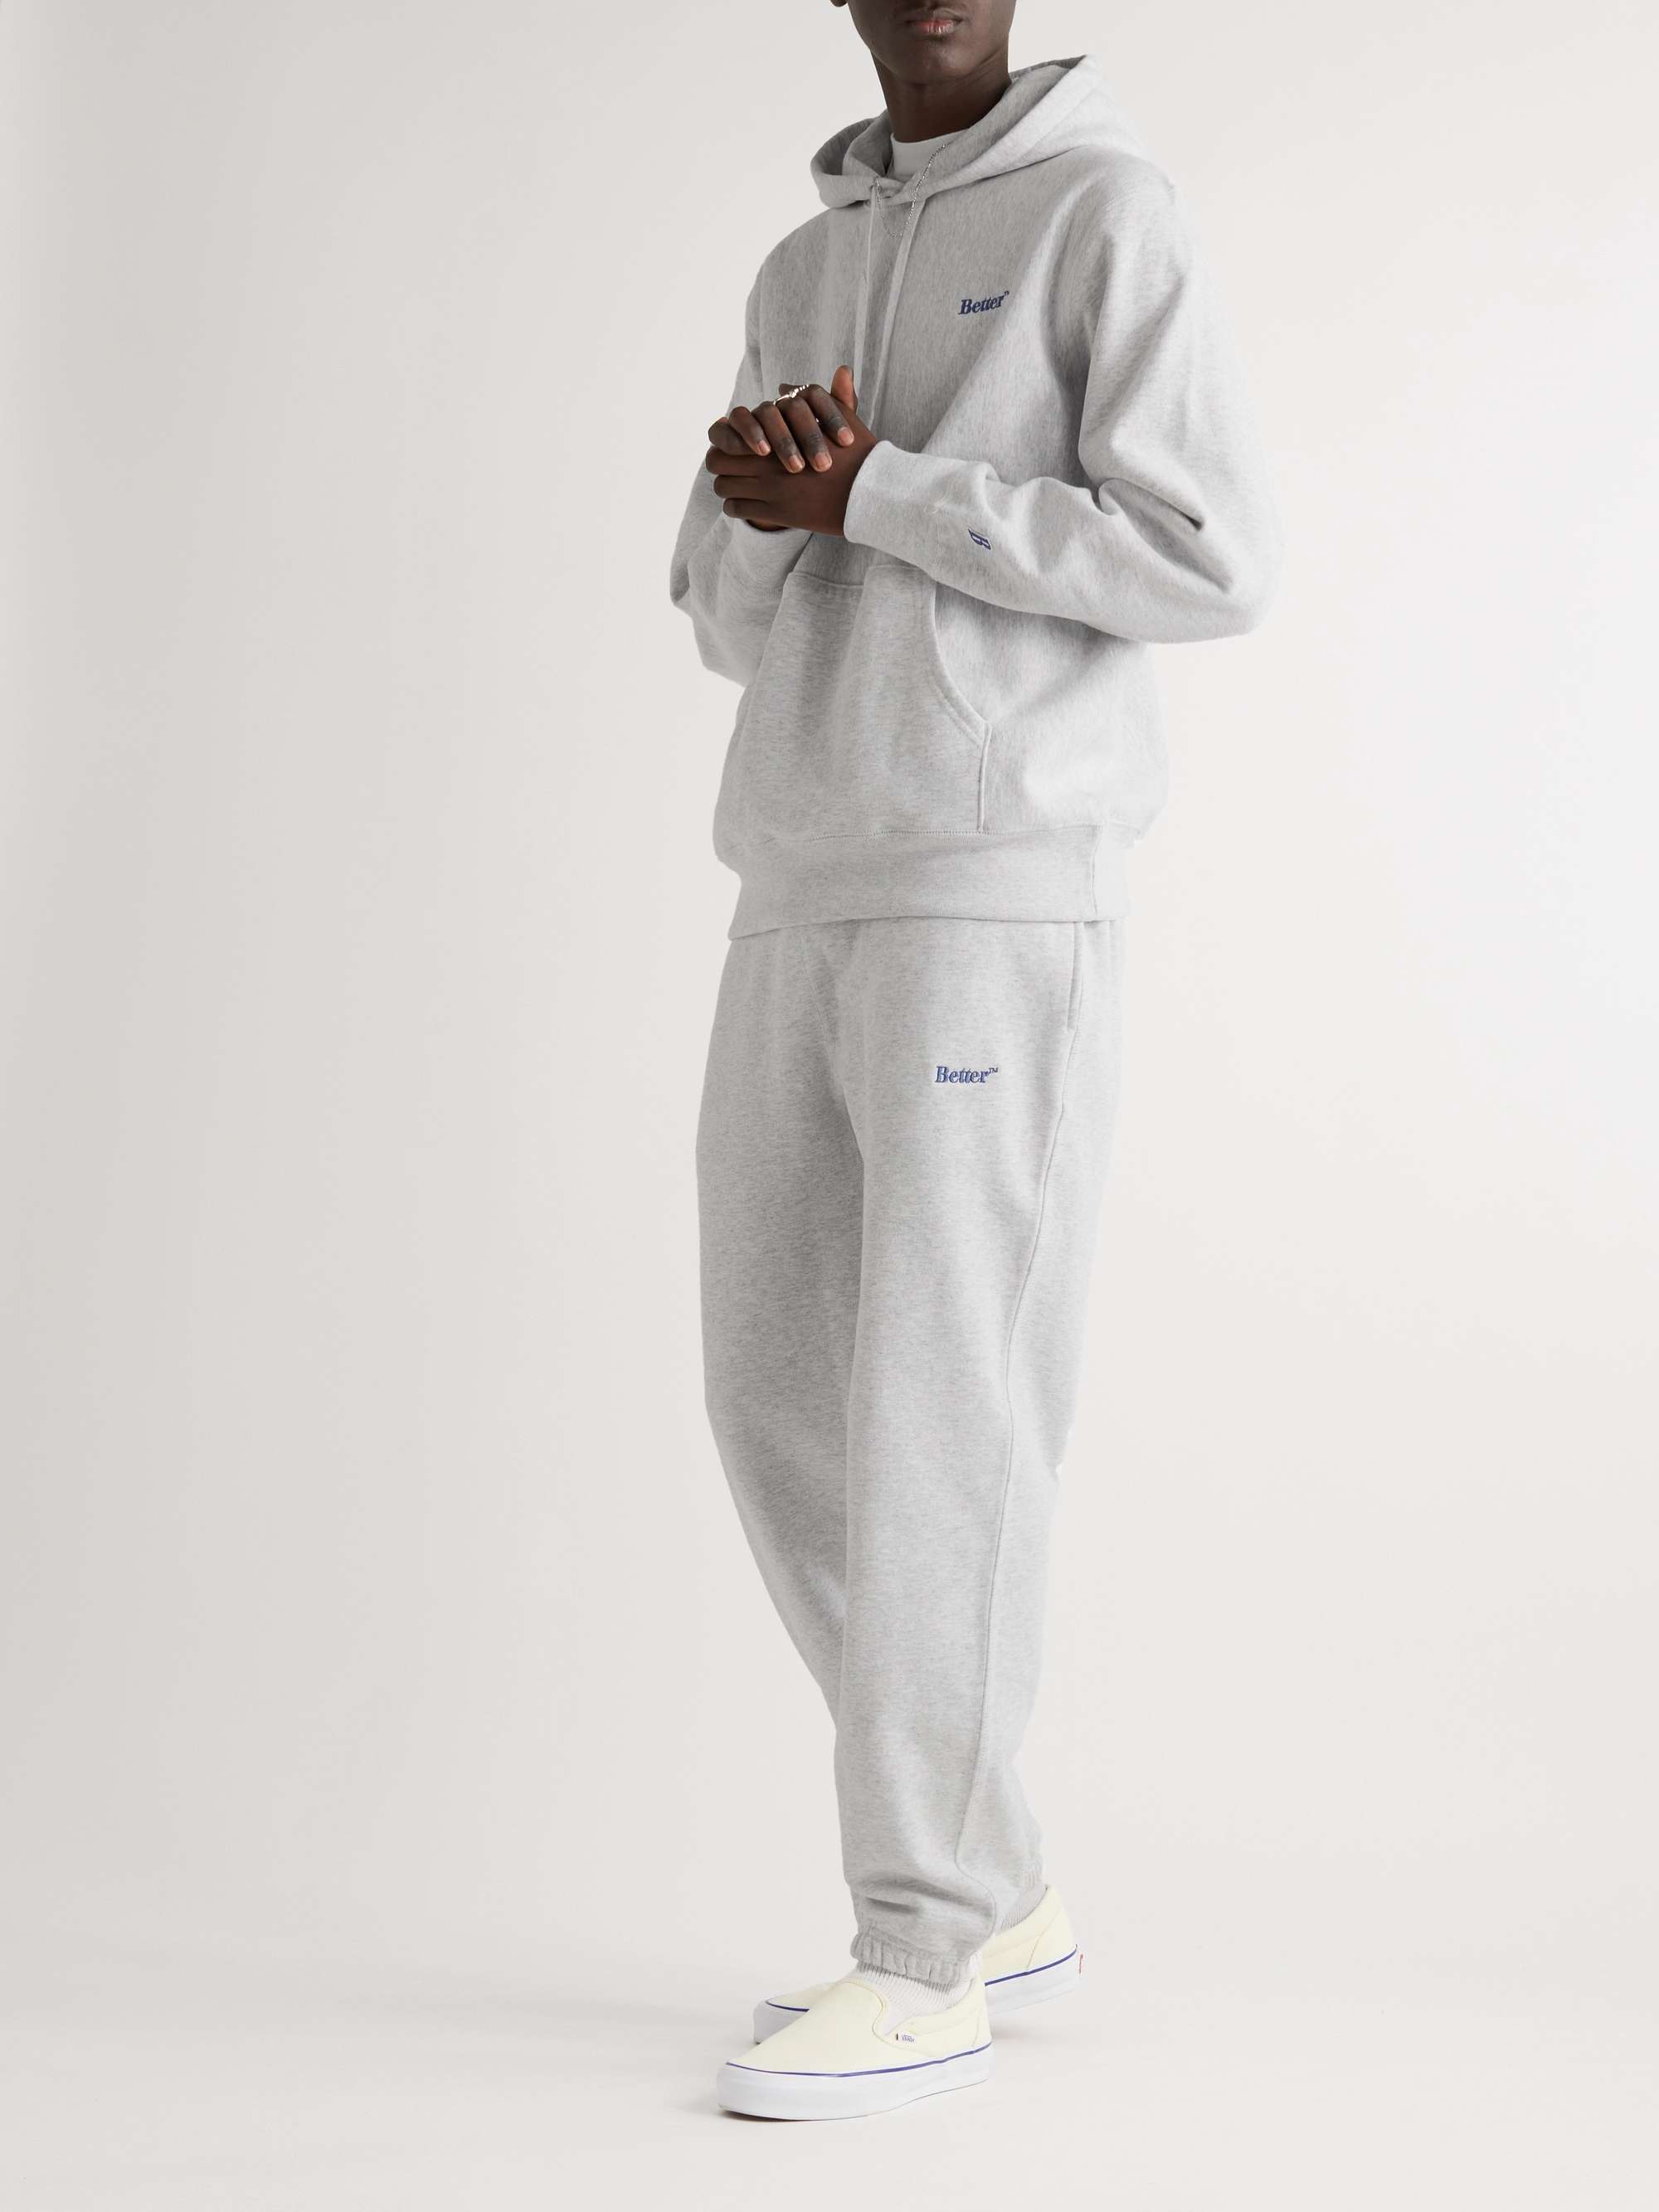 BETTER GIFT SHOP Tapered Logo-Print Cotton-Jersey Sweatpants